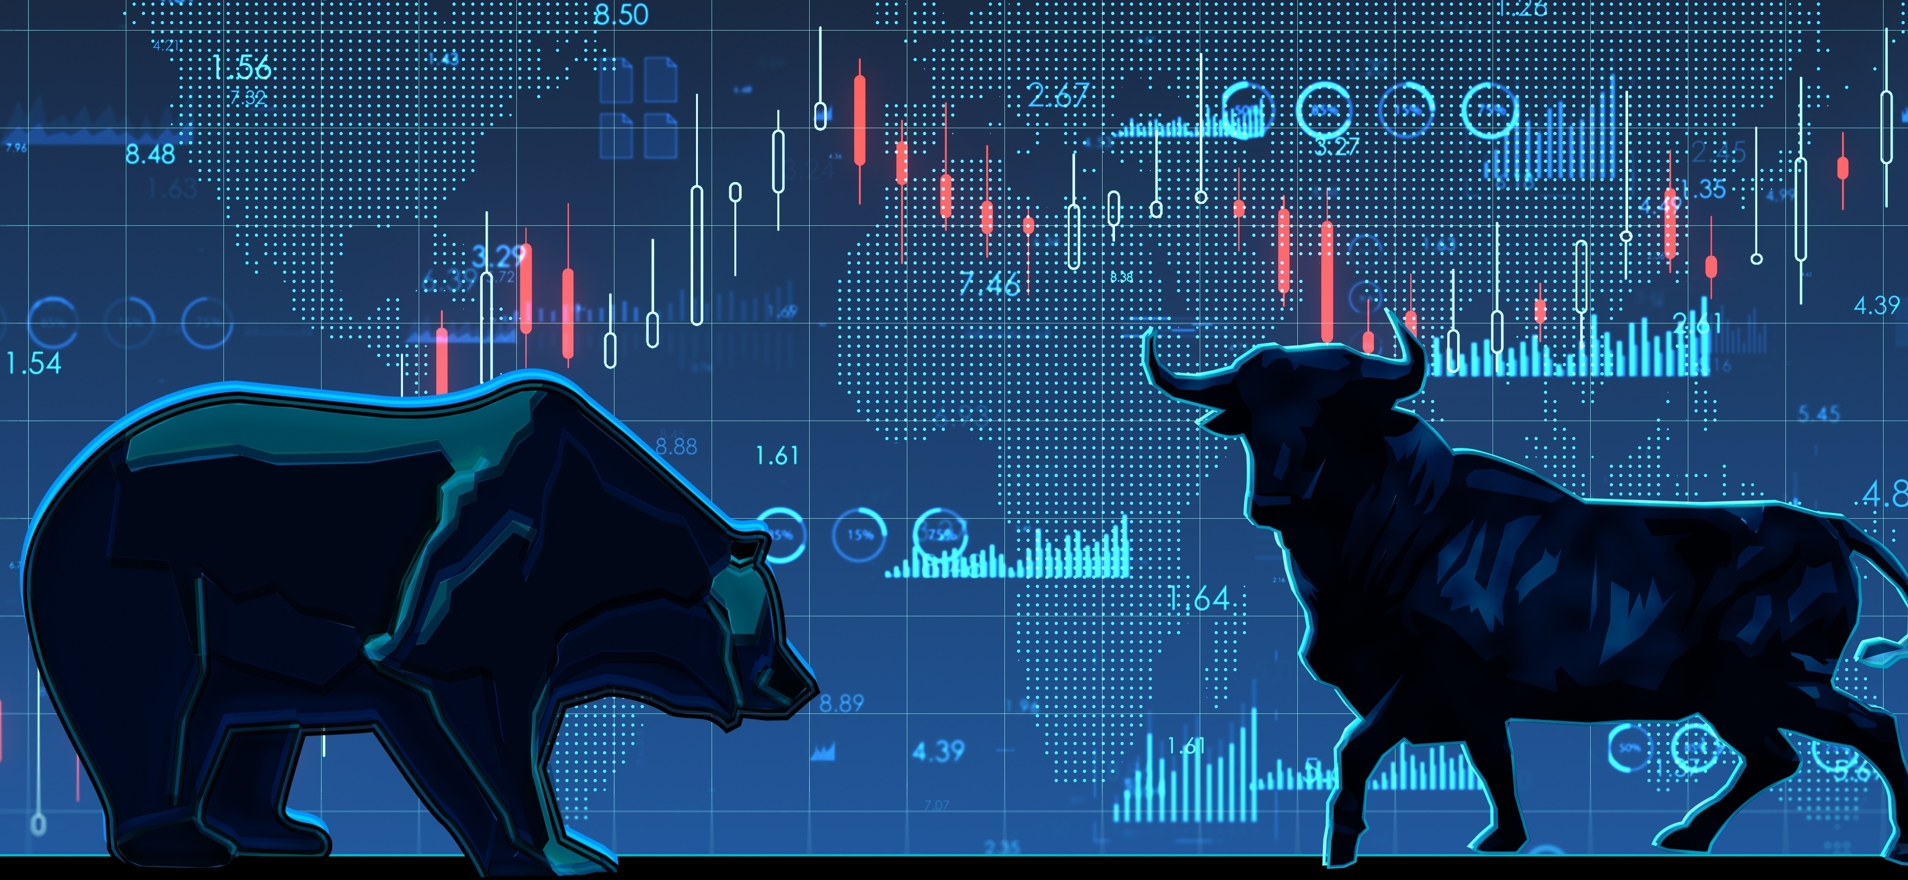 Is there anything that will spark the next crypto bull run?